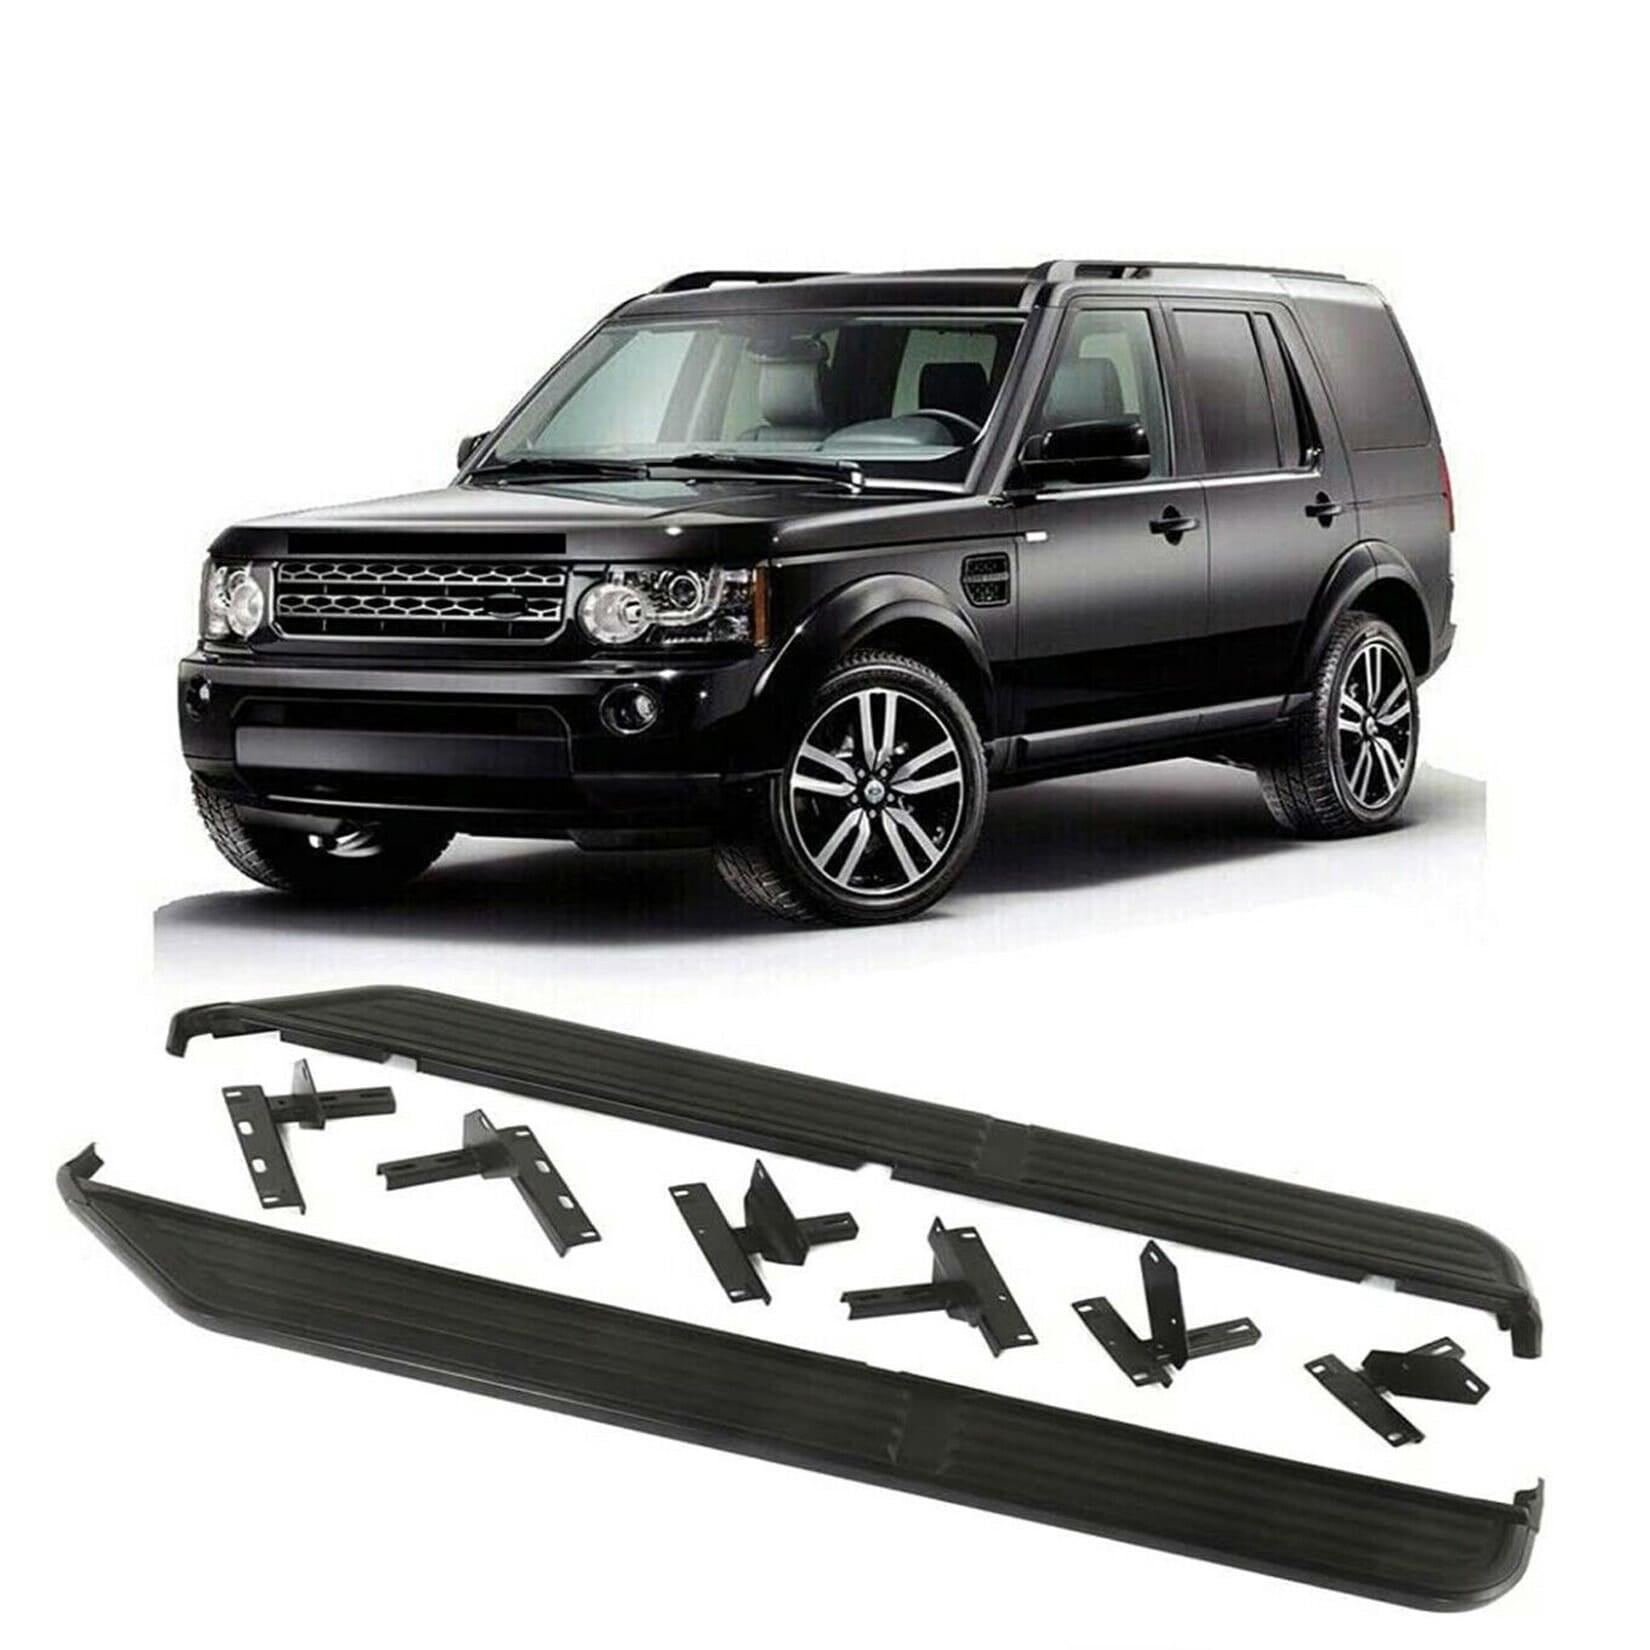 LAND ROVER DISCOVERY 3 – 4 – 2005-2015 OE STYLE SIDE STEPS – RUNNING BOARDS BLACK EDITION - Storm Xccessories2